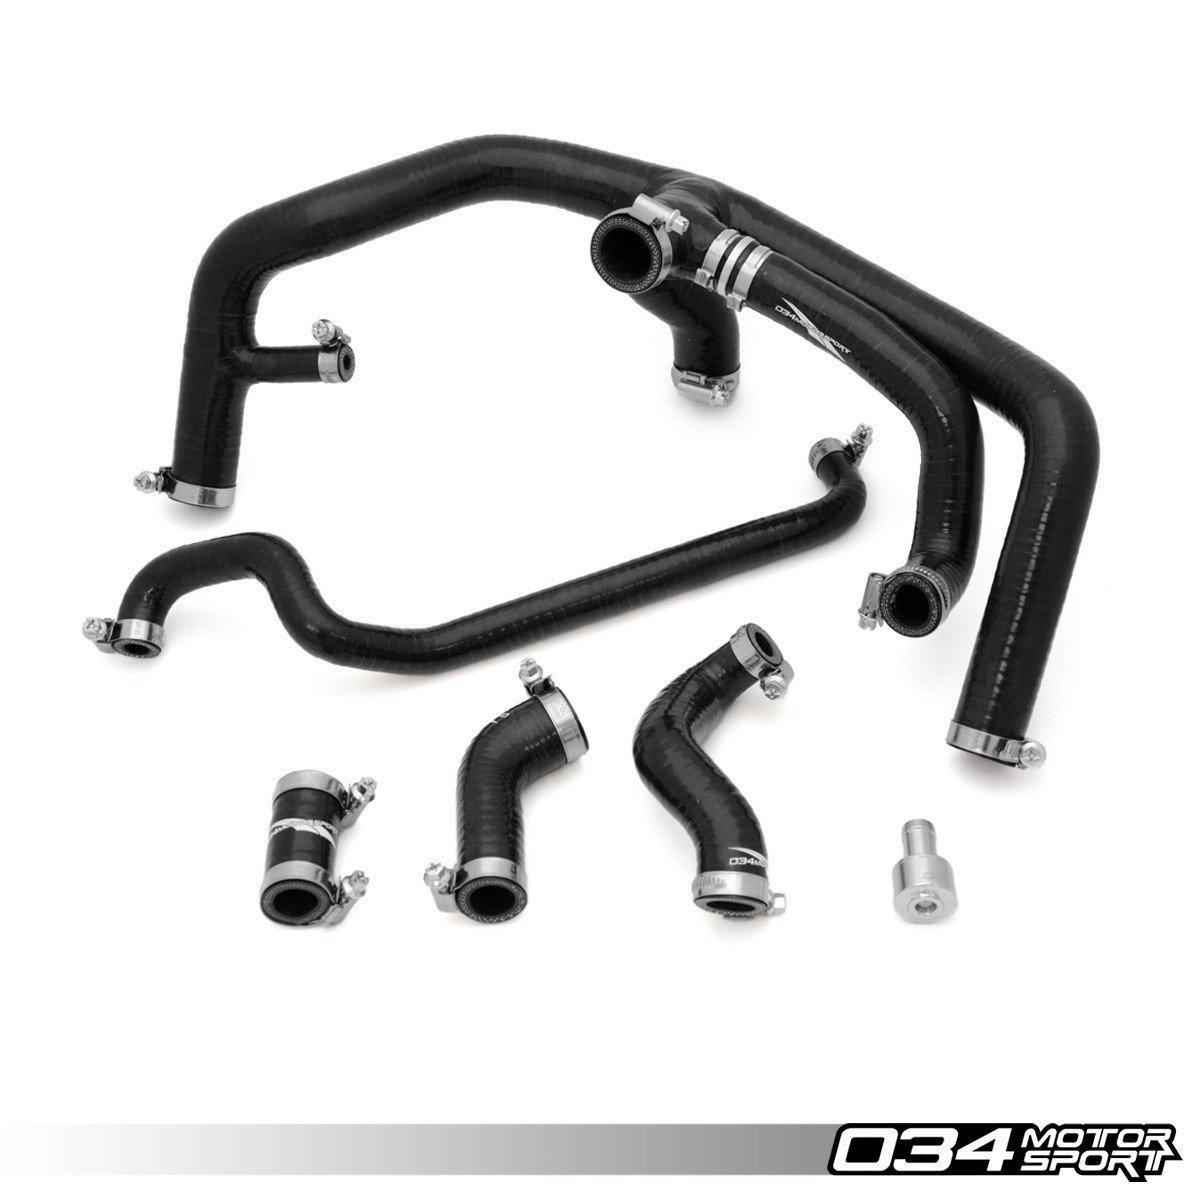 Silicone Breather Hose Kit, B5 Audi S4 &amp; C5 Audi A6 2.7T, Spider Hose Replacement-A Little Tuning Co